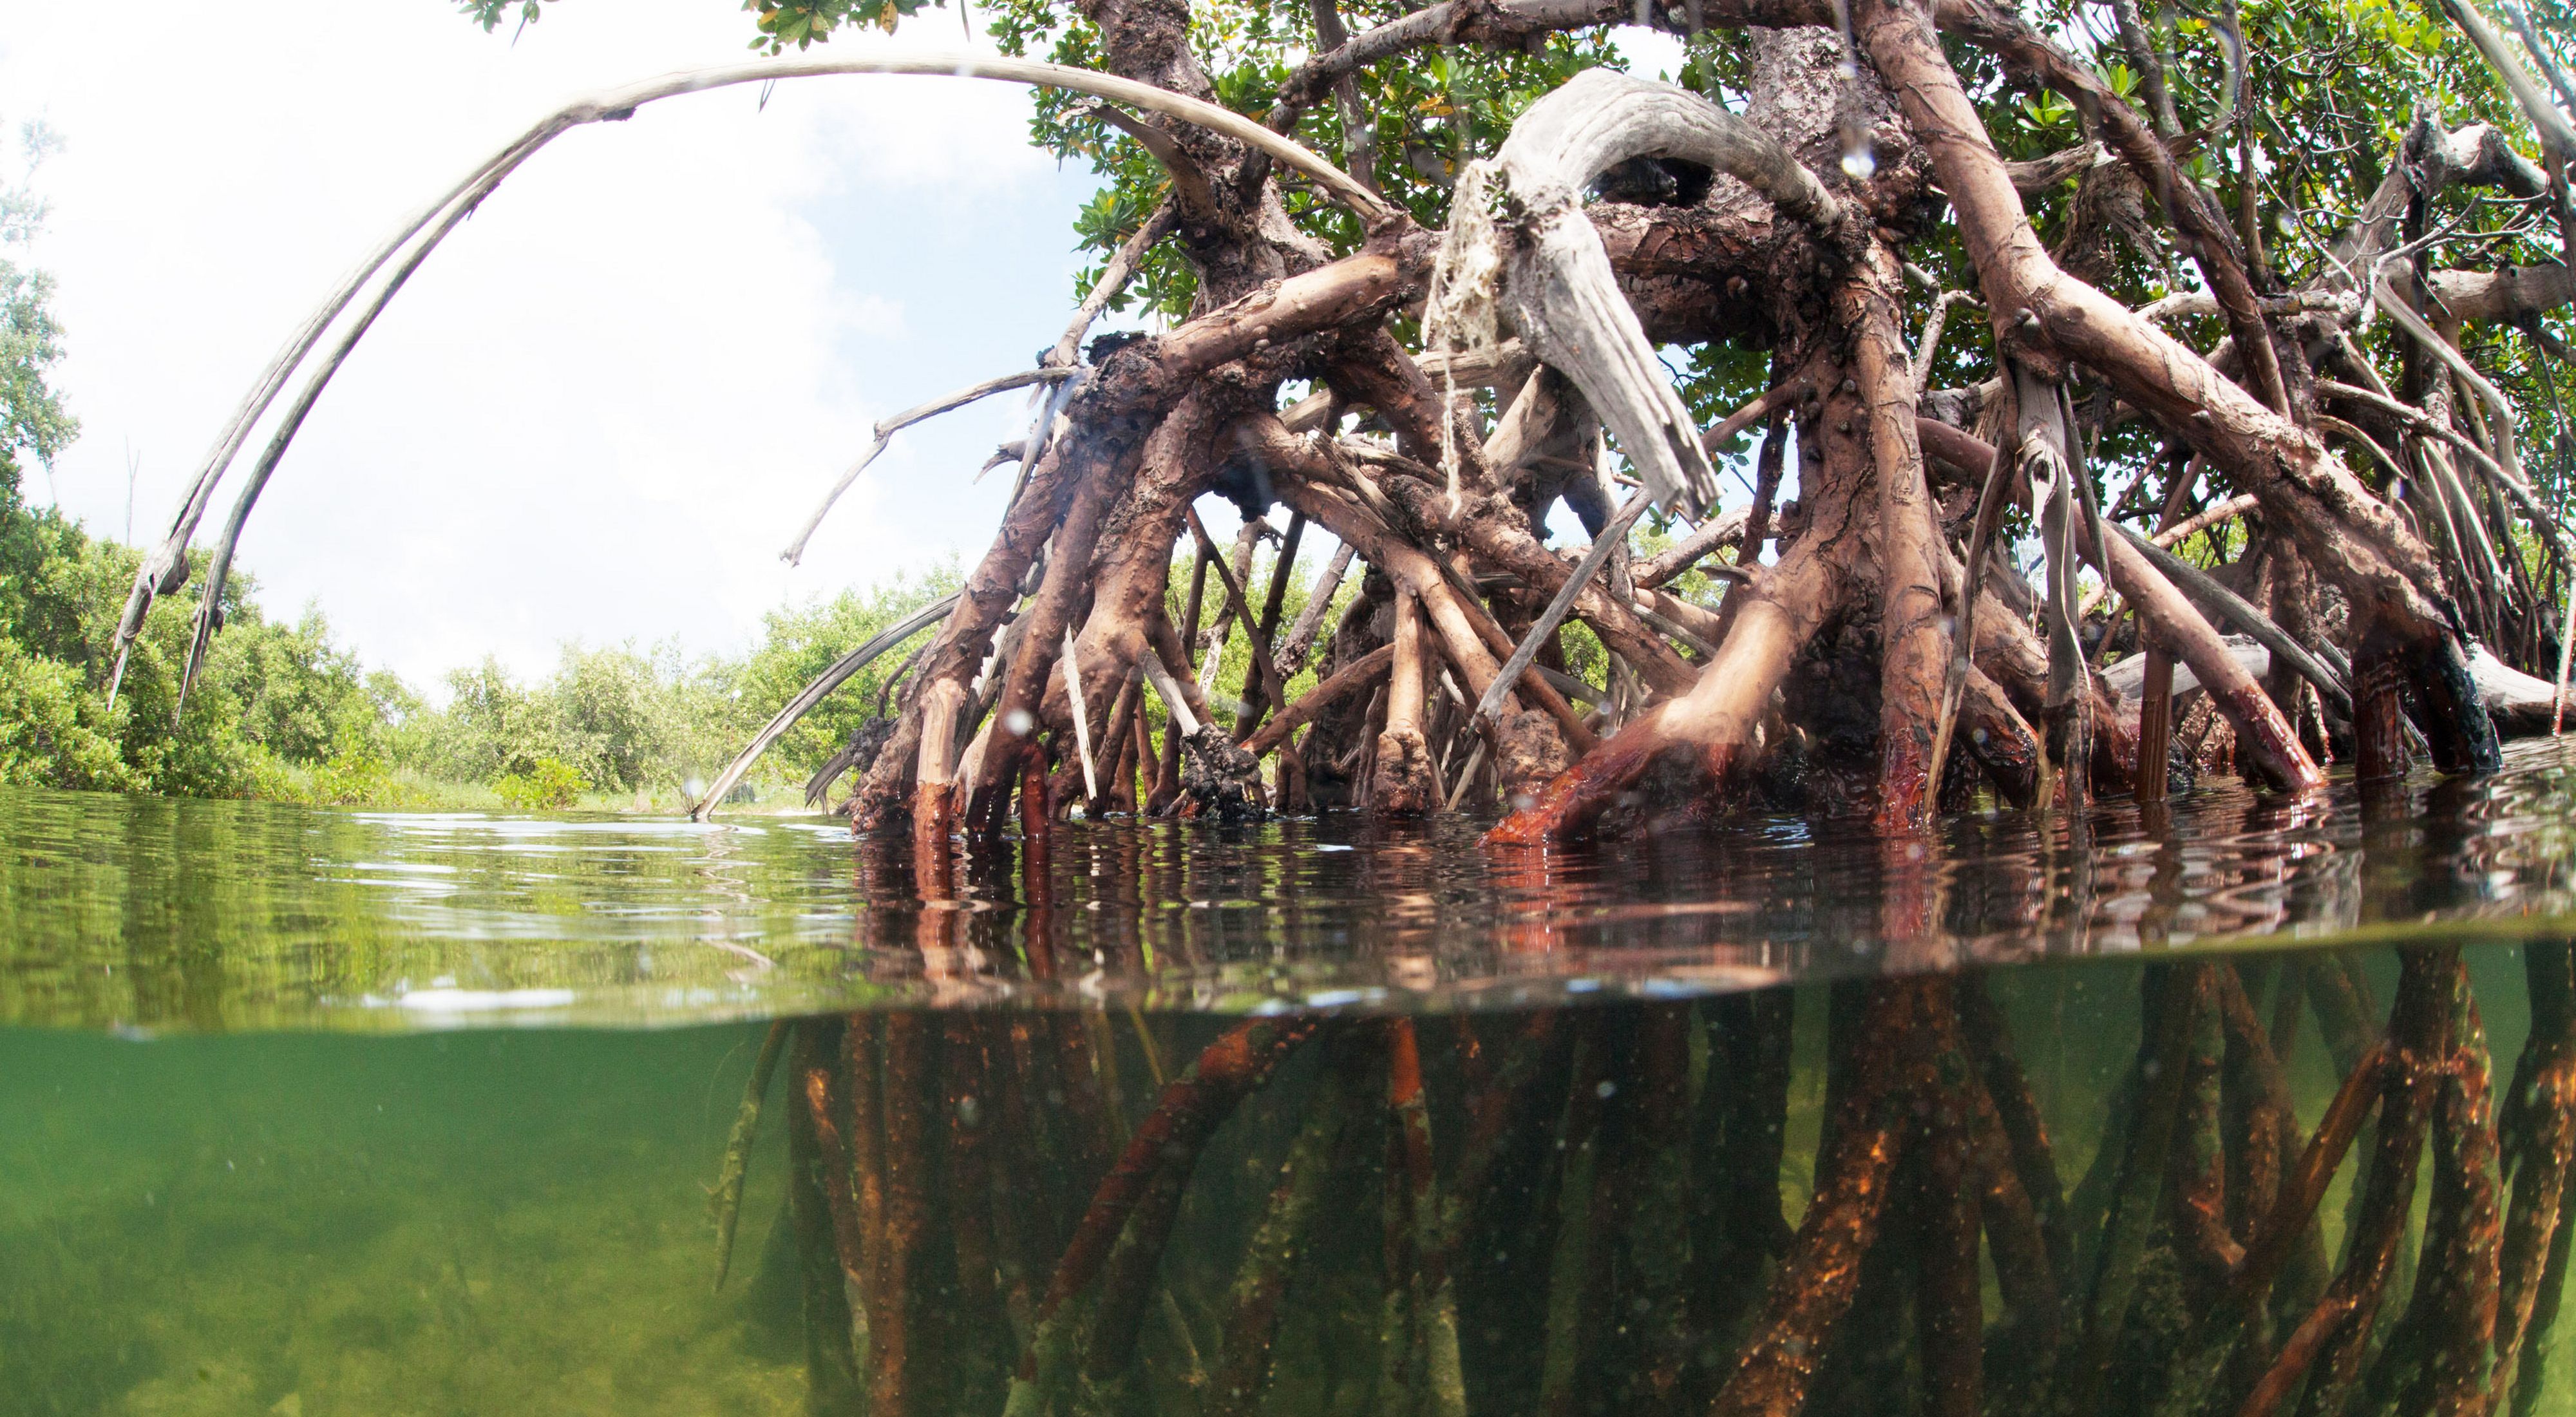 Split view of underwater and above water showing mangrove plants and roots.